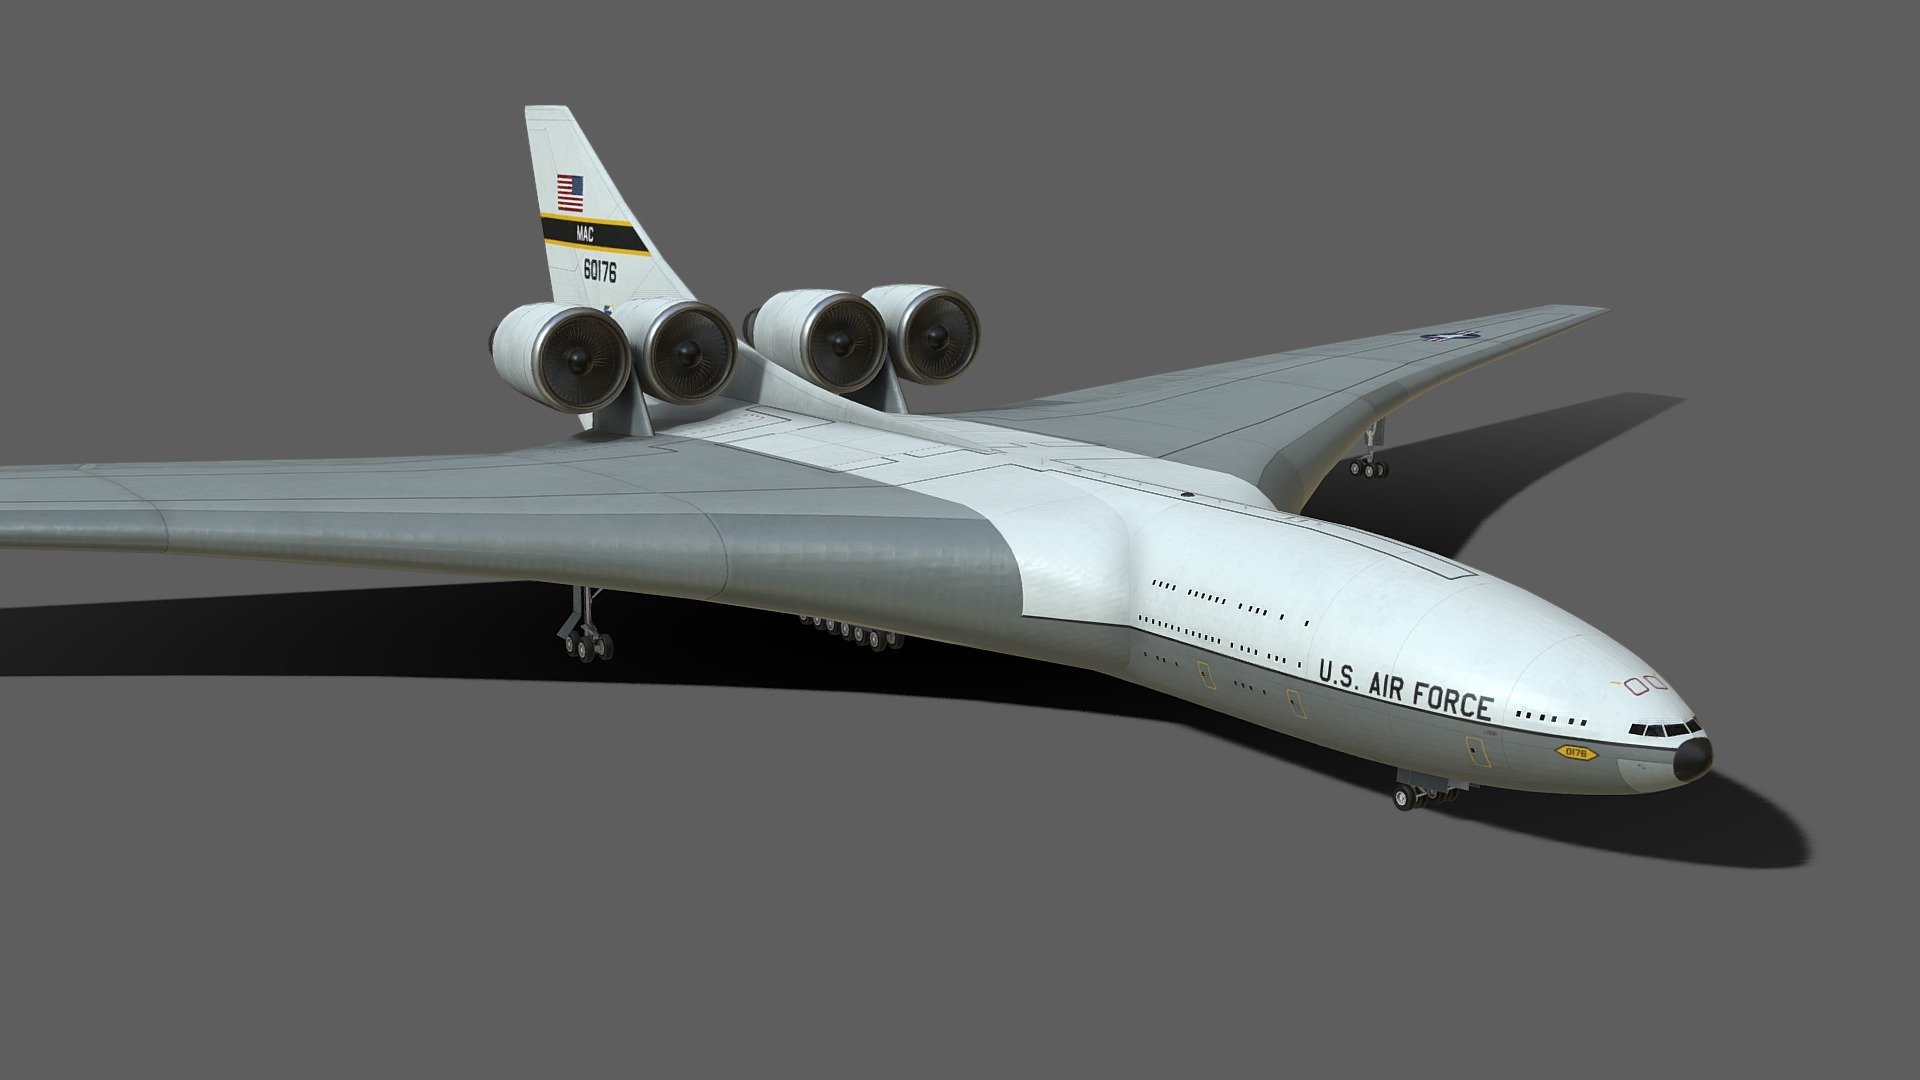 The Lockheed CL-1201 was a design study by Lockheed for a giant nuclear-powered transport aircraft in the late 1960s. One envisioned use of the concept was as an airborne aircraft carrier.
Span: 1,120 feet (341 meter)
Gross weight: 11.85 million pounds (5375 metric tonnes)
Endurance: 41 days
Reactor output: 1830 megawatts
Crew: 400-845
Tactical fighters carried (AAC variant): 22
Main engines: 4 - Lockheed CL-1201 nuclear powered aircraft - Buy Royalty Free 3D model by Tim Samedov (@citizensnip) 3d model